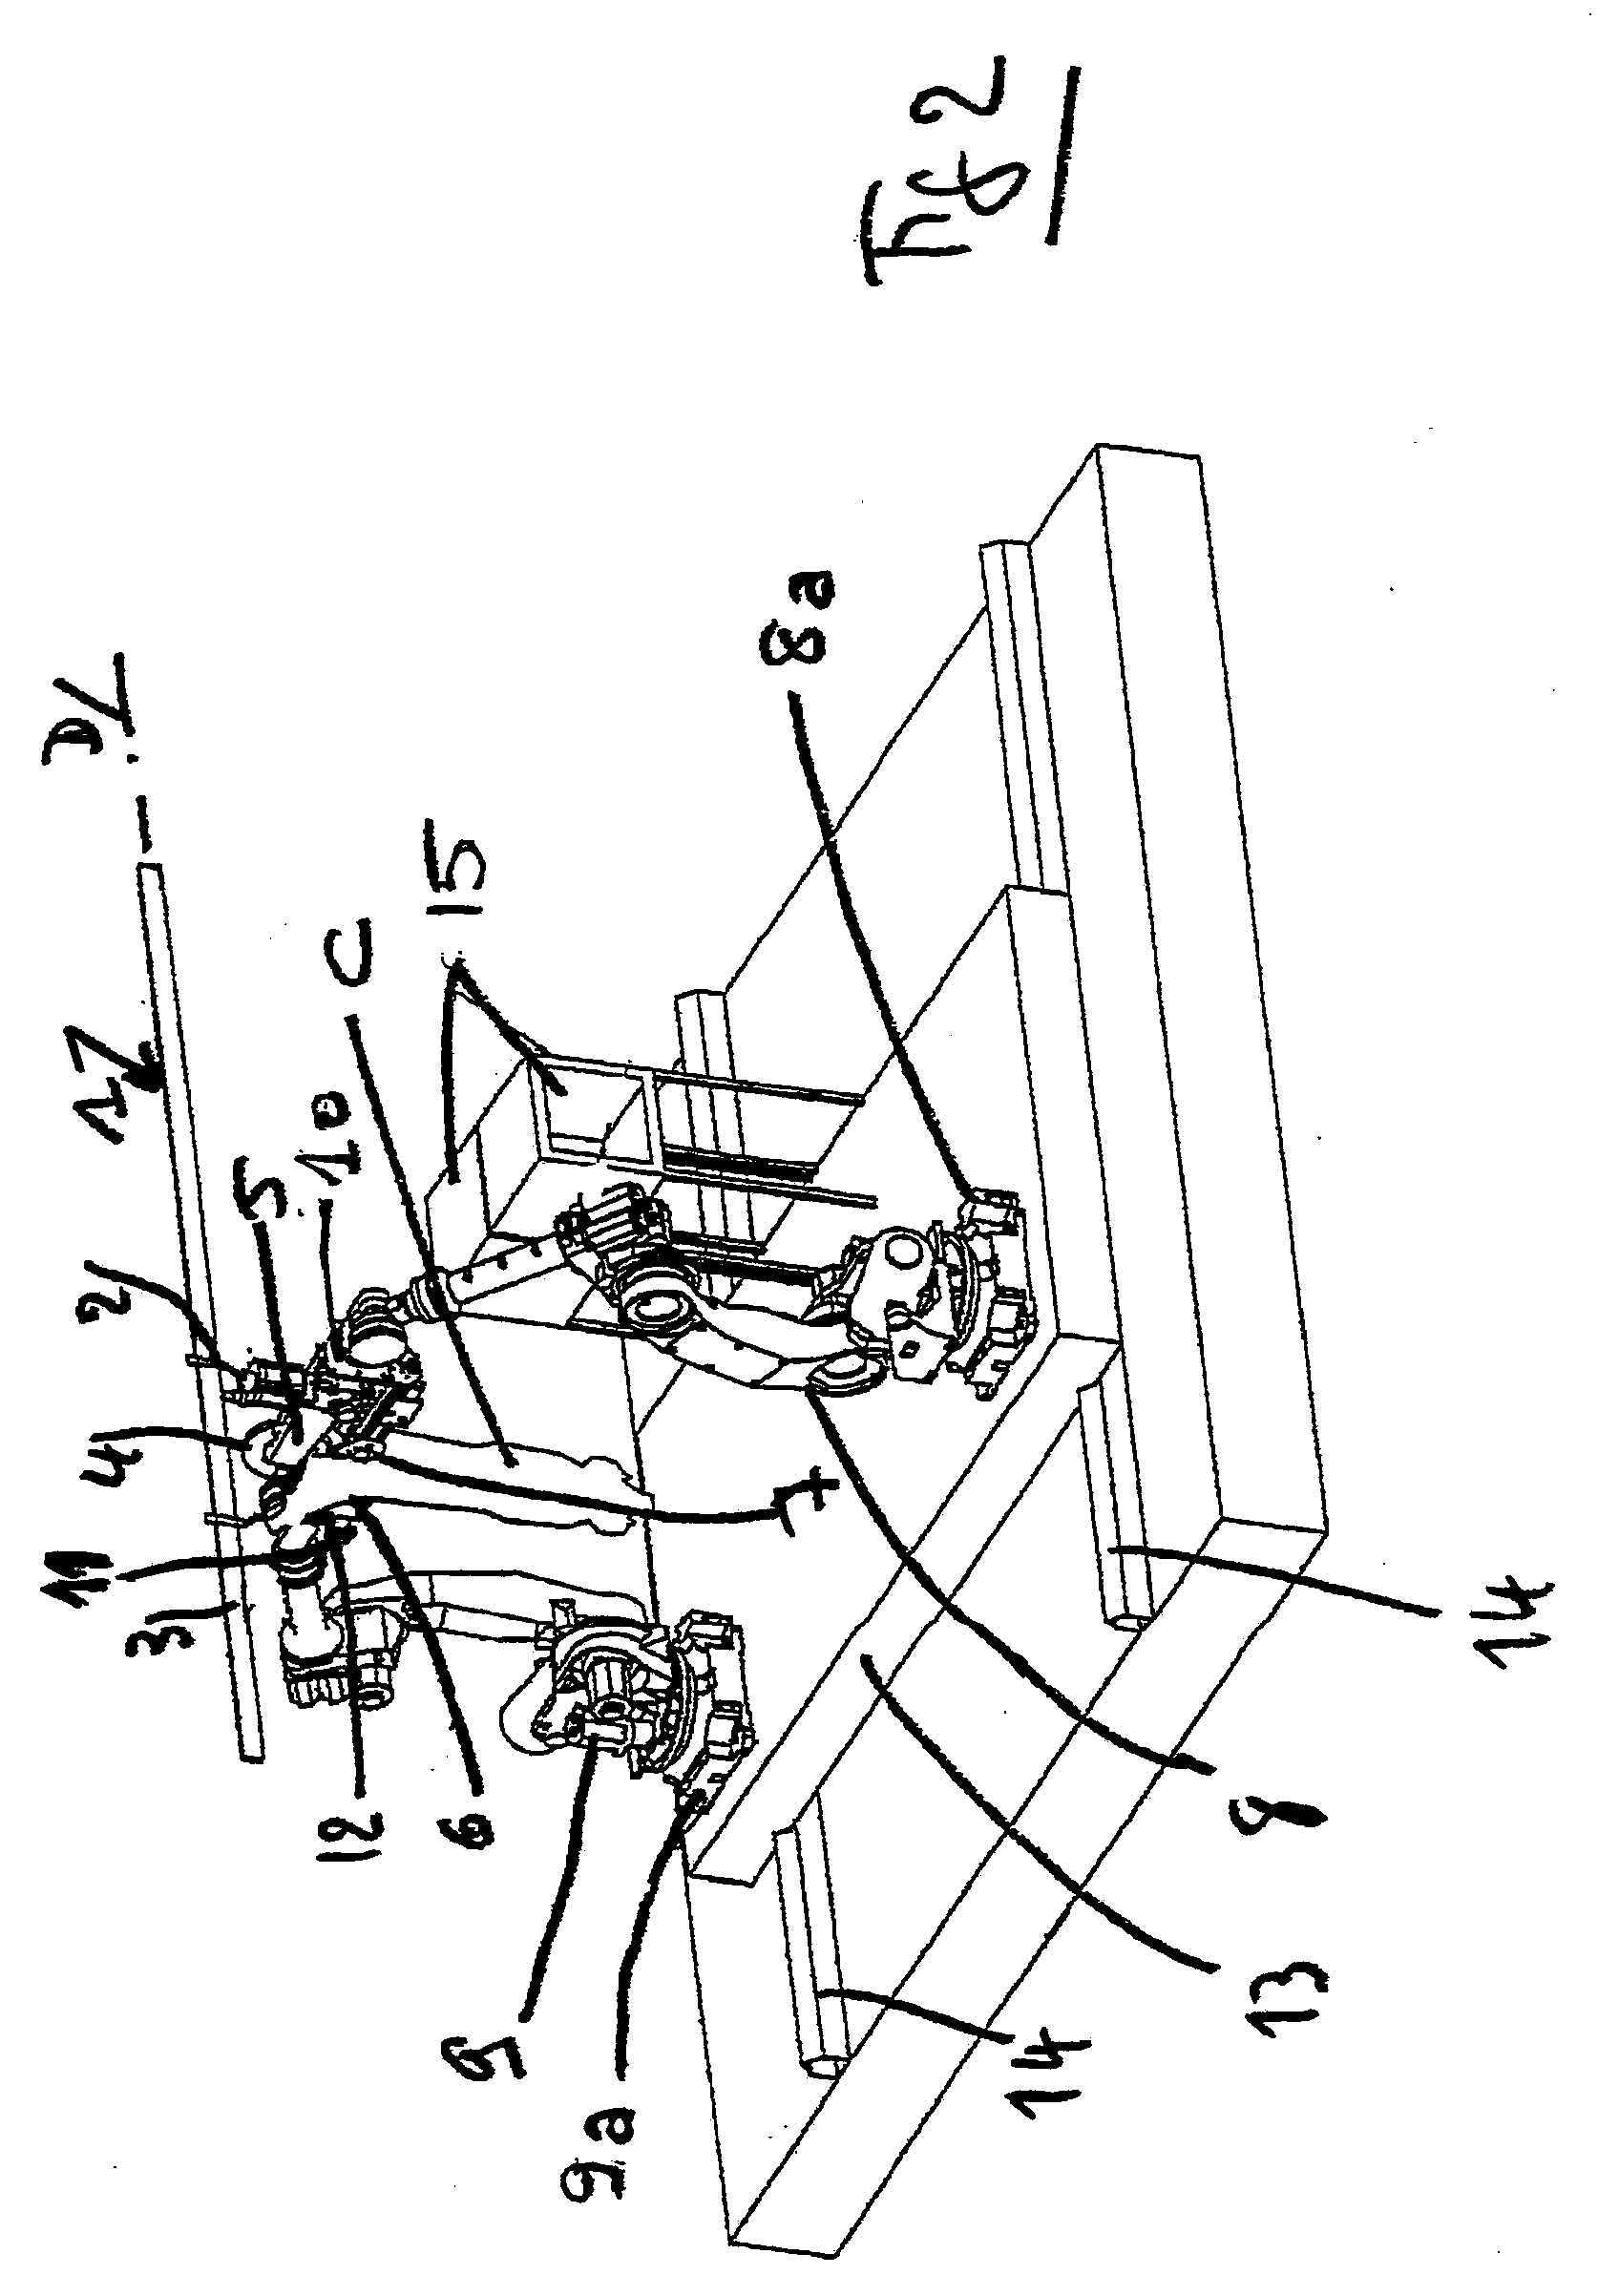 Installation for splitting hog carcasses or equivalent comprising one or more robots